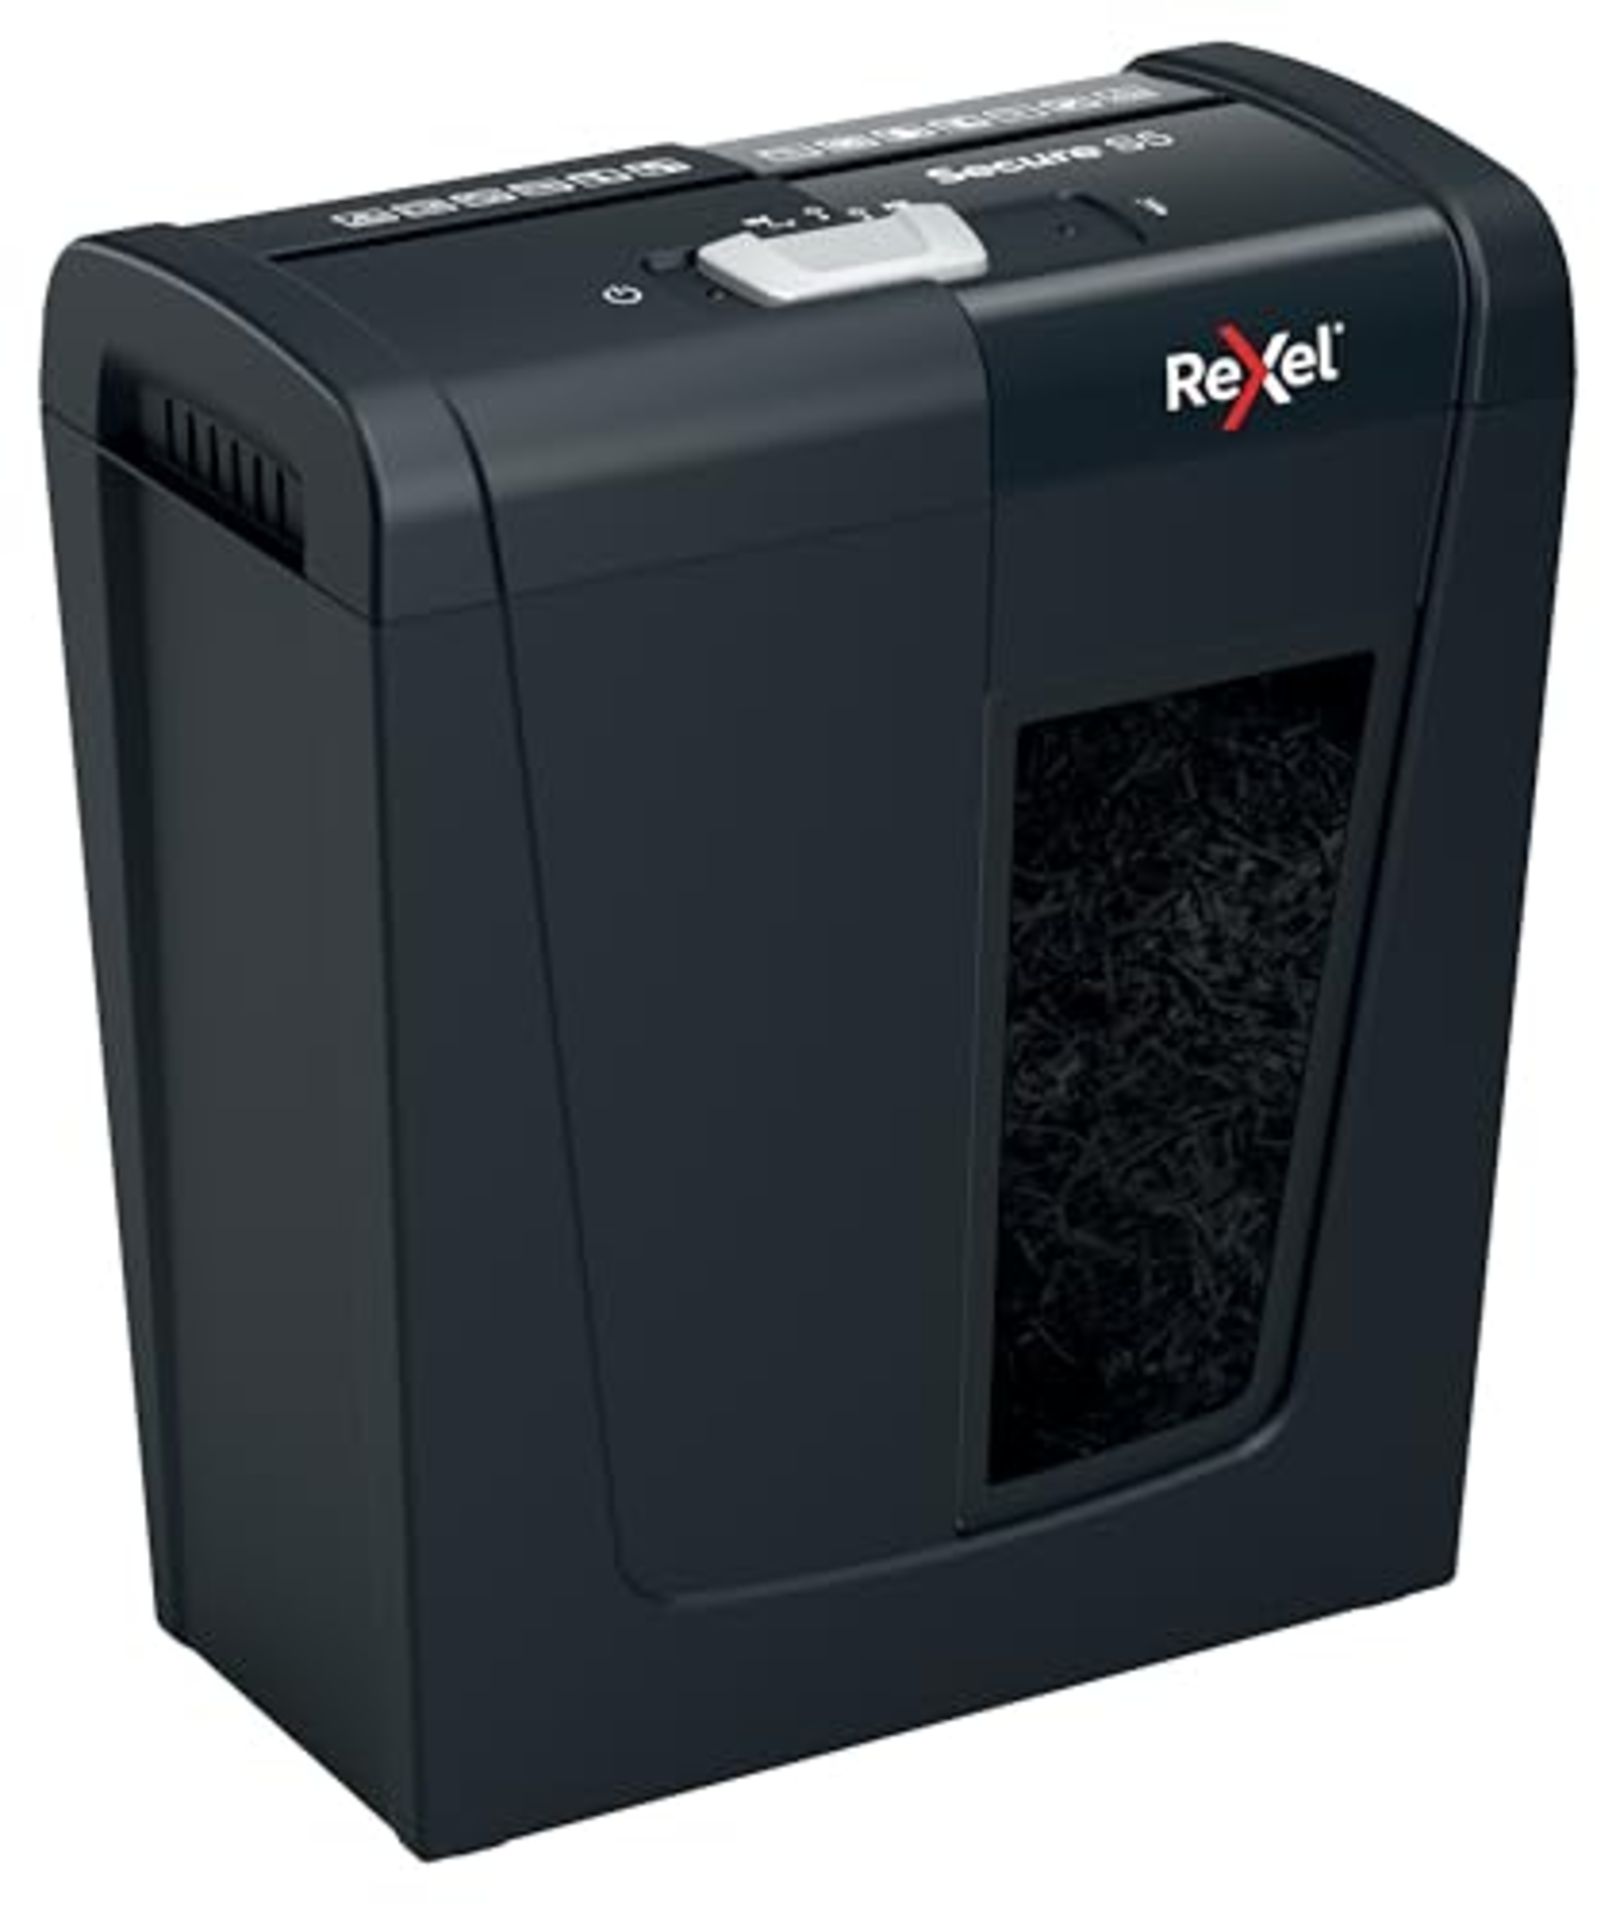 Rexel S5 Strip Cut Paper Shredder, Shreds 5 Sheets, P2 Security, Home/Home Office, 10 Litre Removab